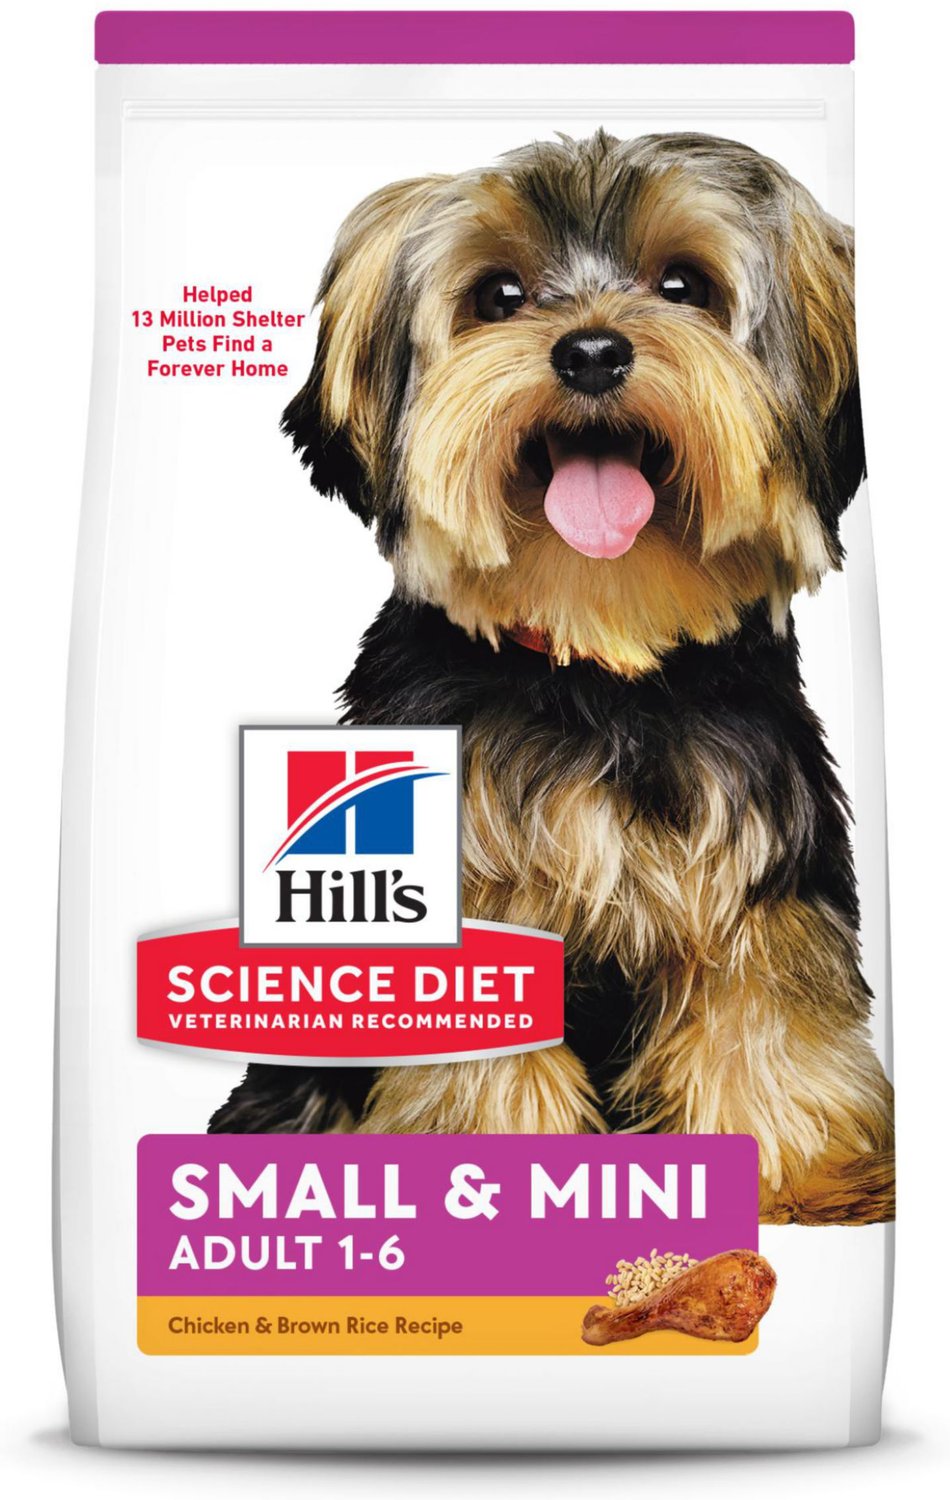 Hill's Science Diet Adult